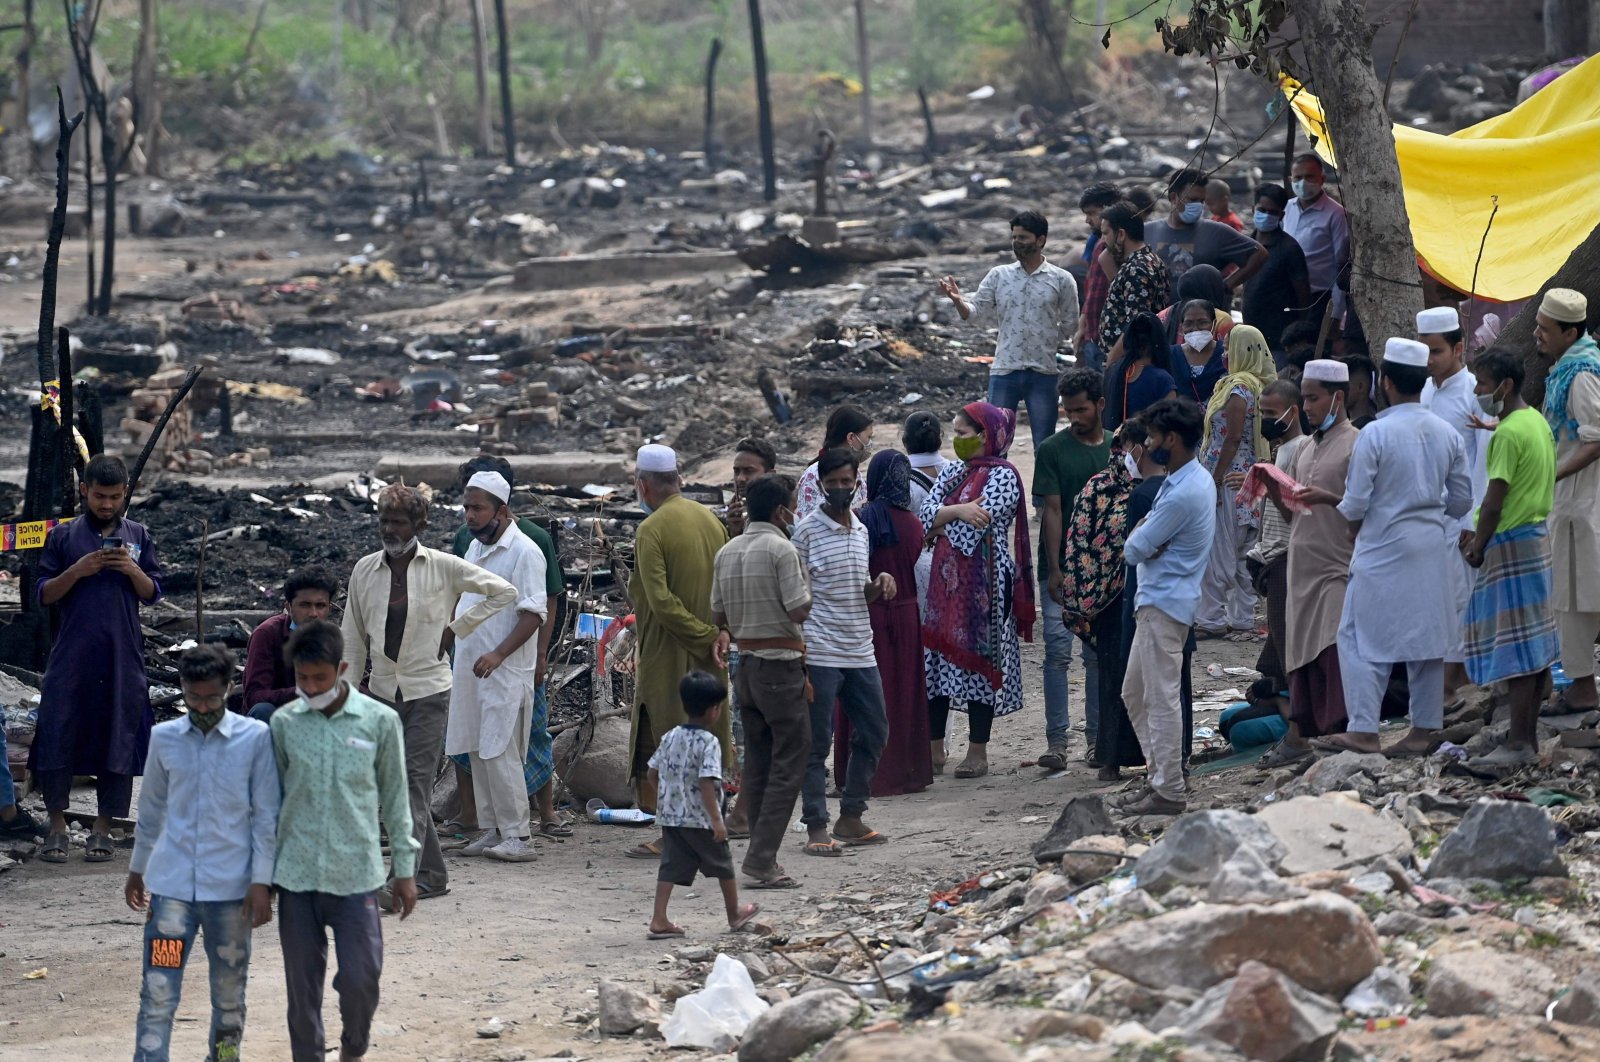 Rohingya refugees gather near the charred remains of their camp after a fire earlier in the day, New Delhi, India, June 13, 2021. (AFP Photo)